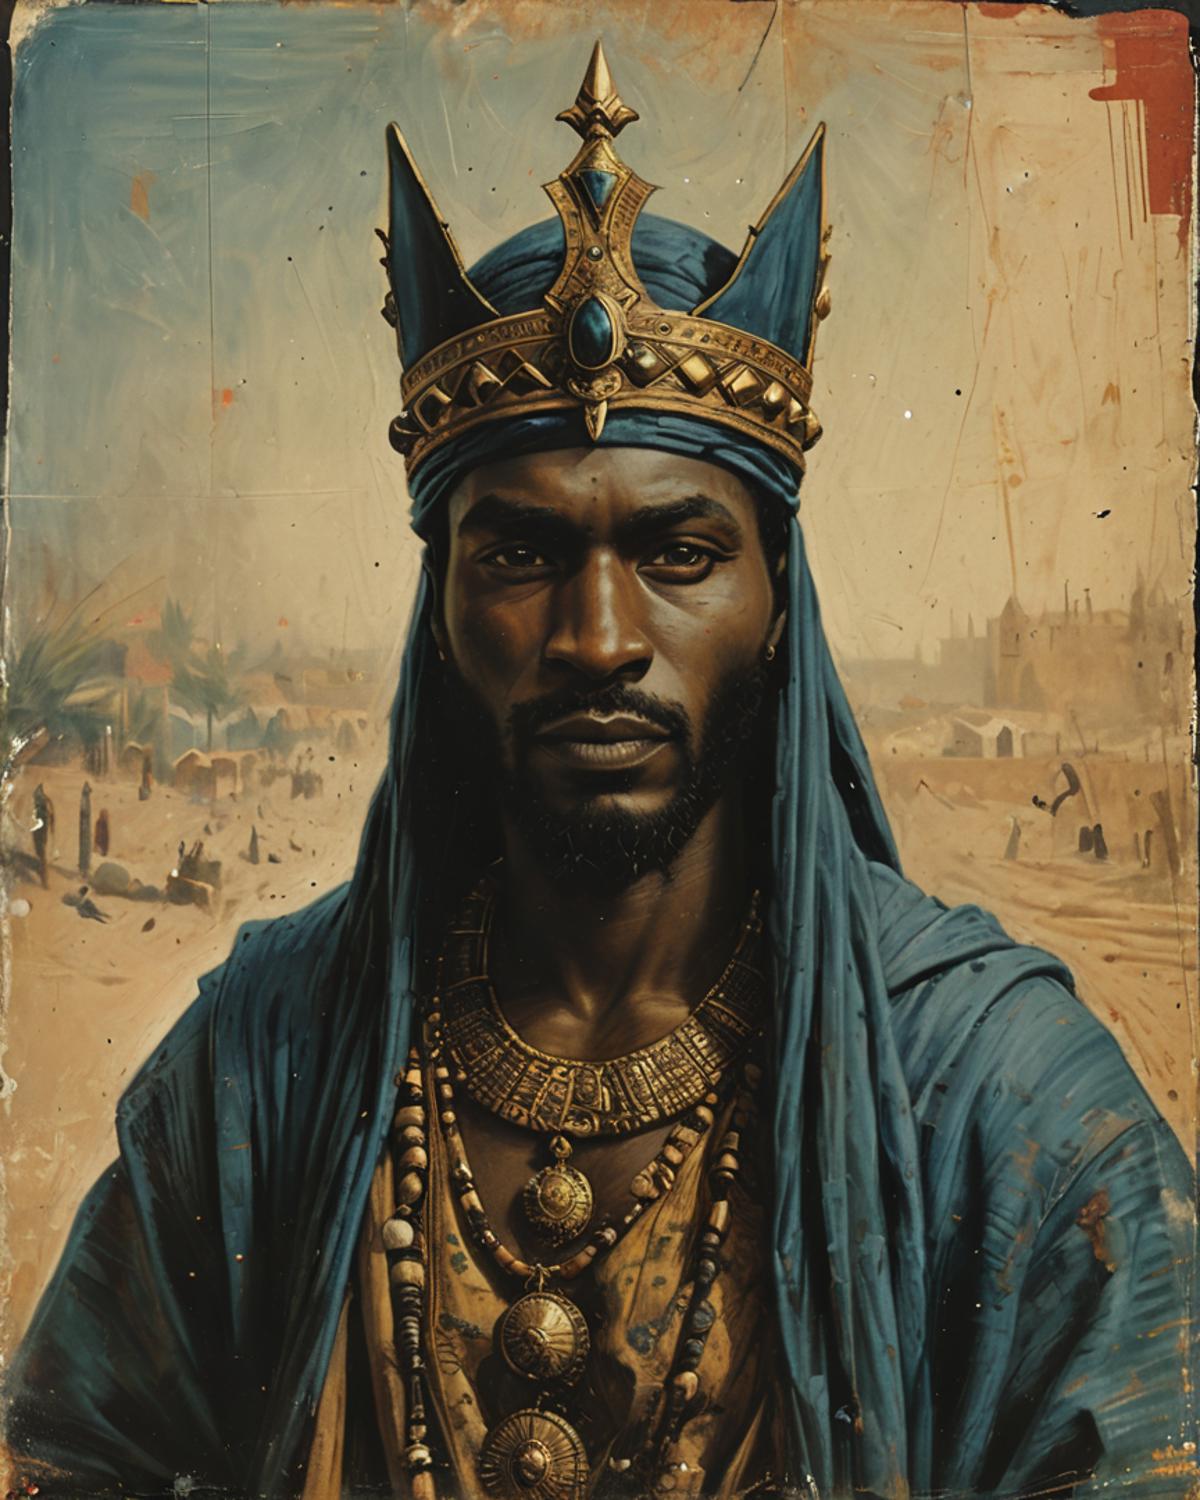 A portrait of a man wearing a blue turban and a crown.